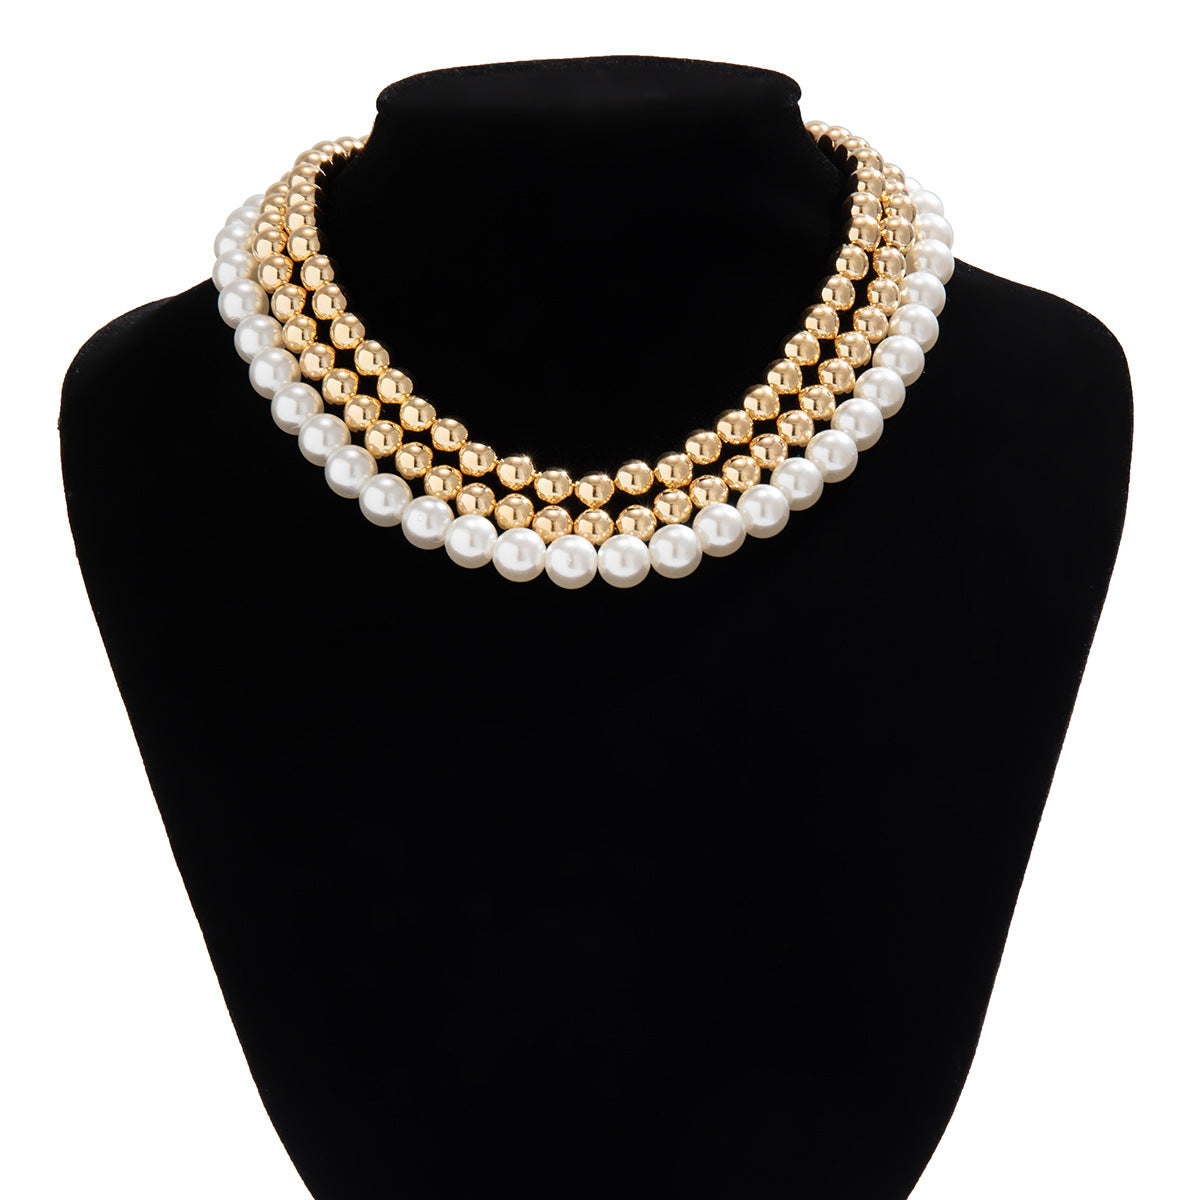 Contrasting Beaded Choker Necklace with European and American Influence